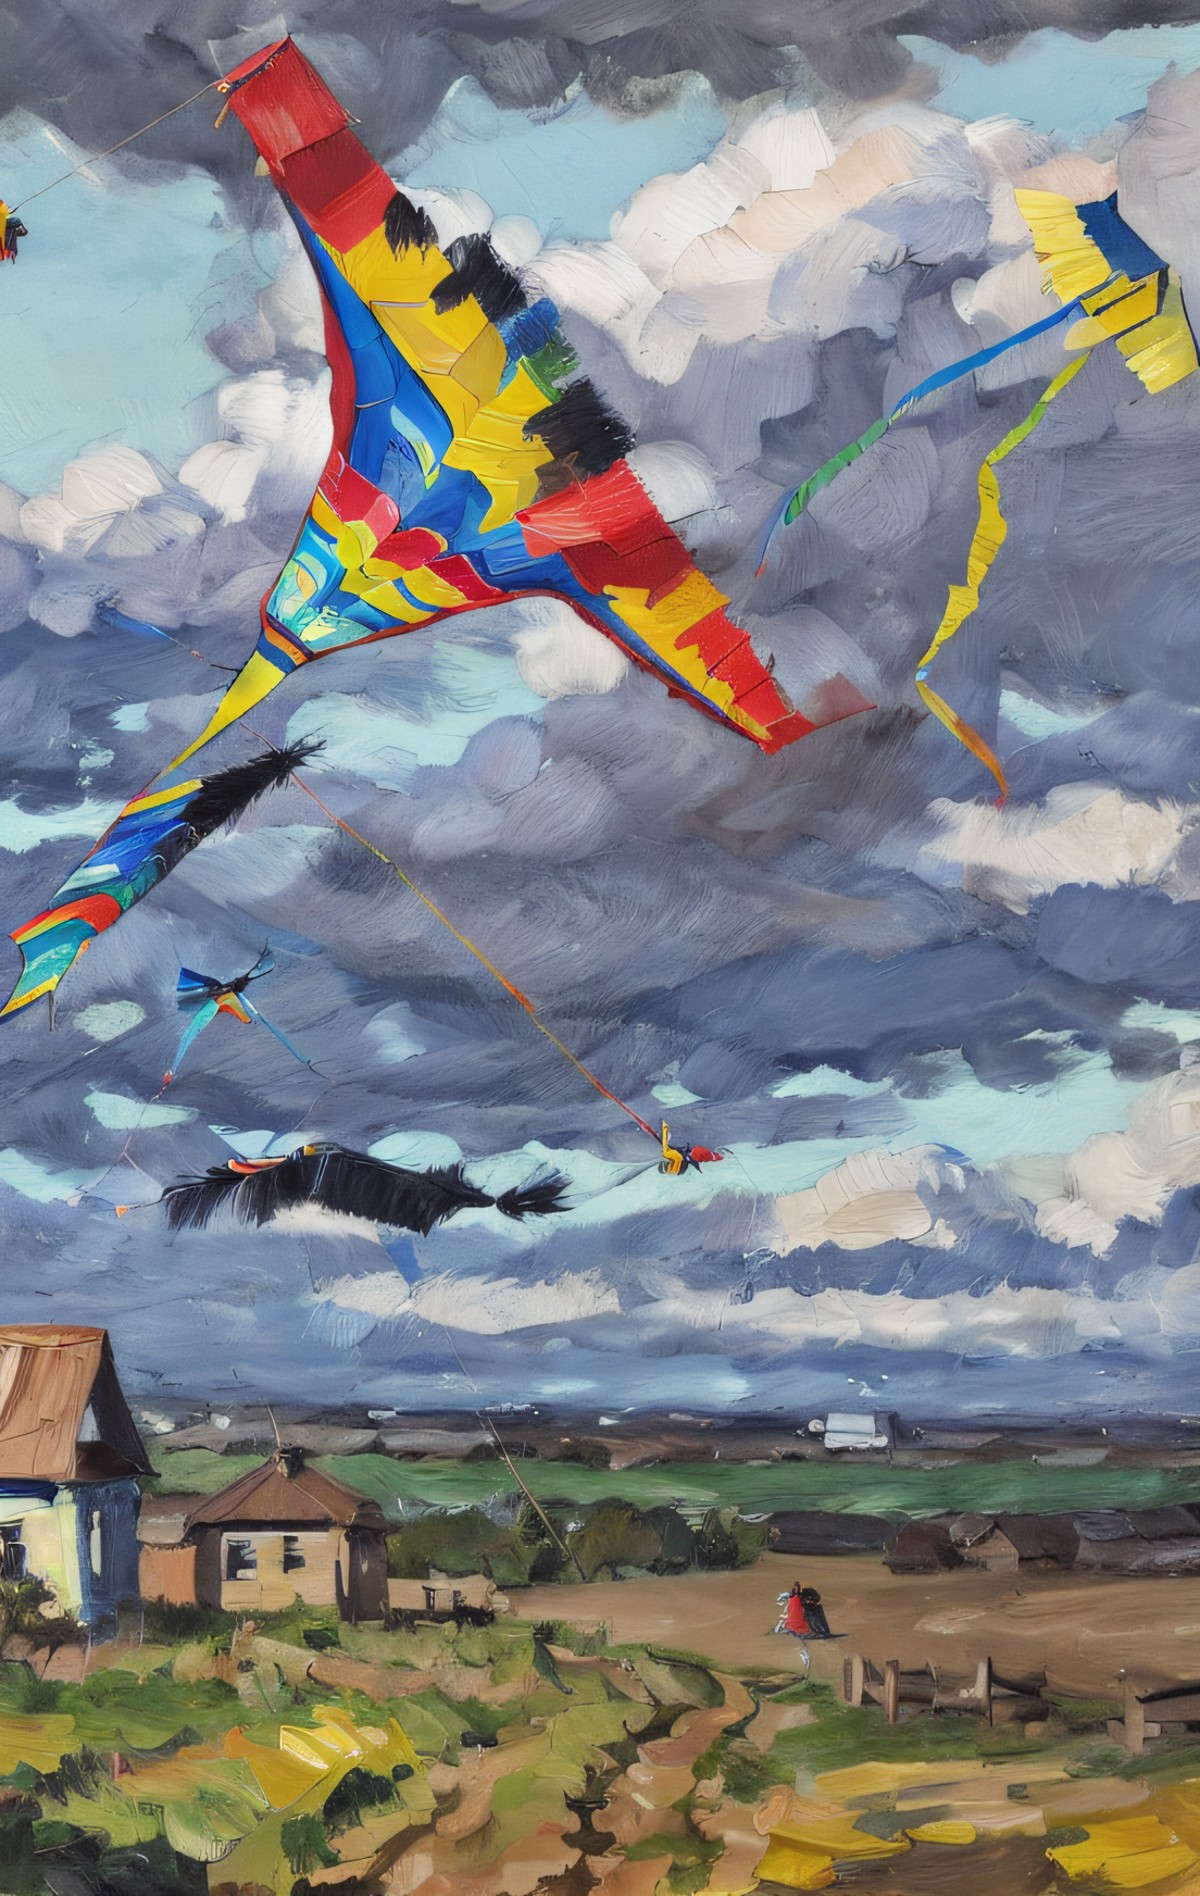 (a painting by mse) (brush strokes) of a landscape with houses, mud road and clouds in the background and a kite flying in...